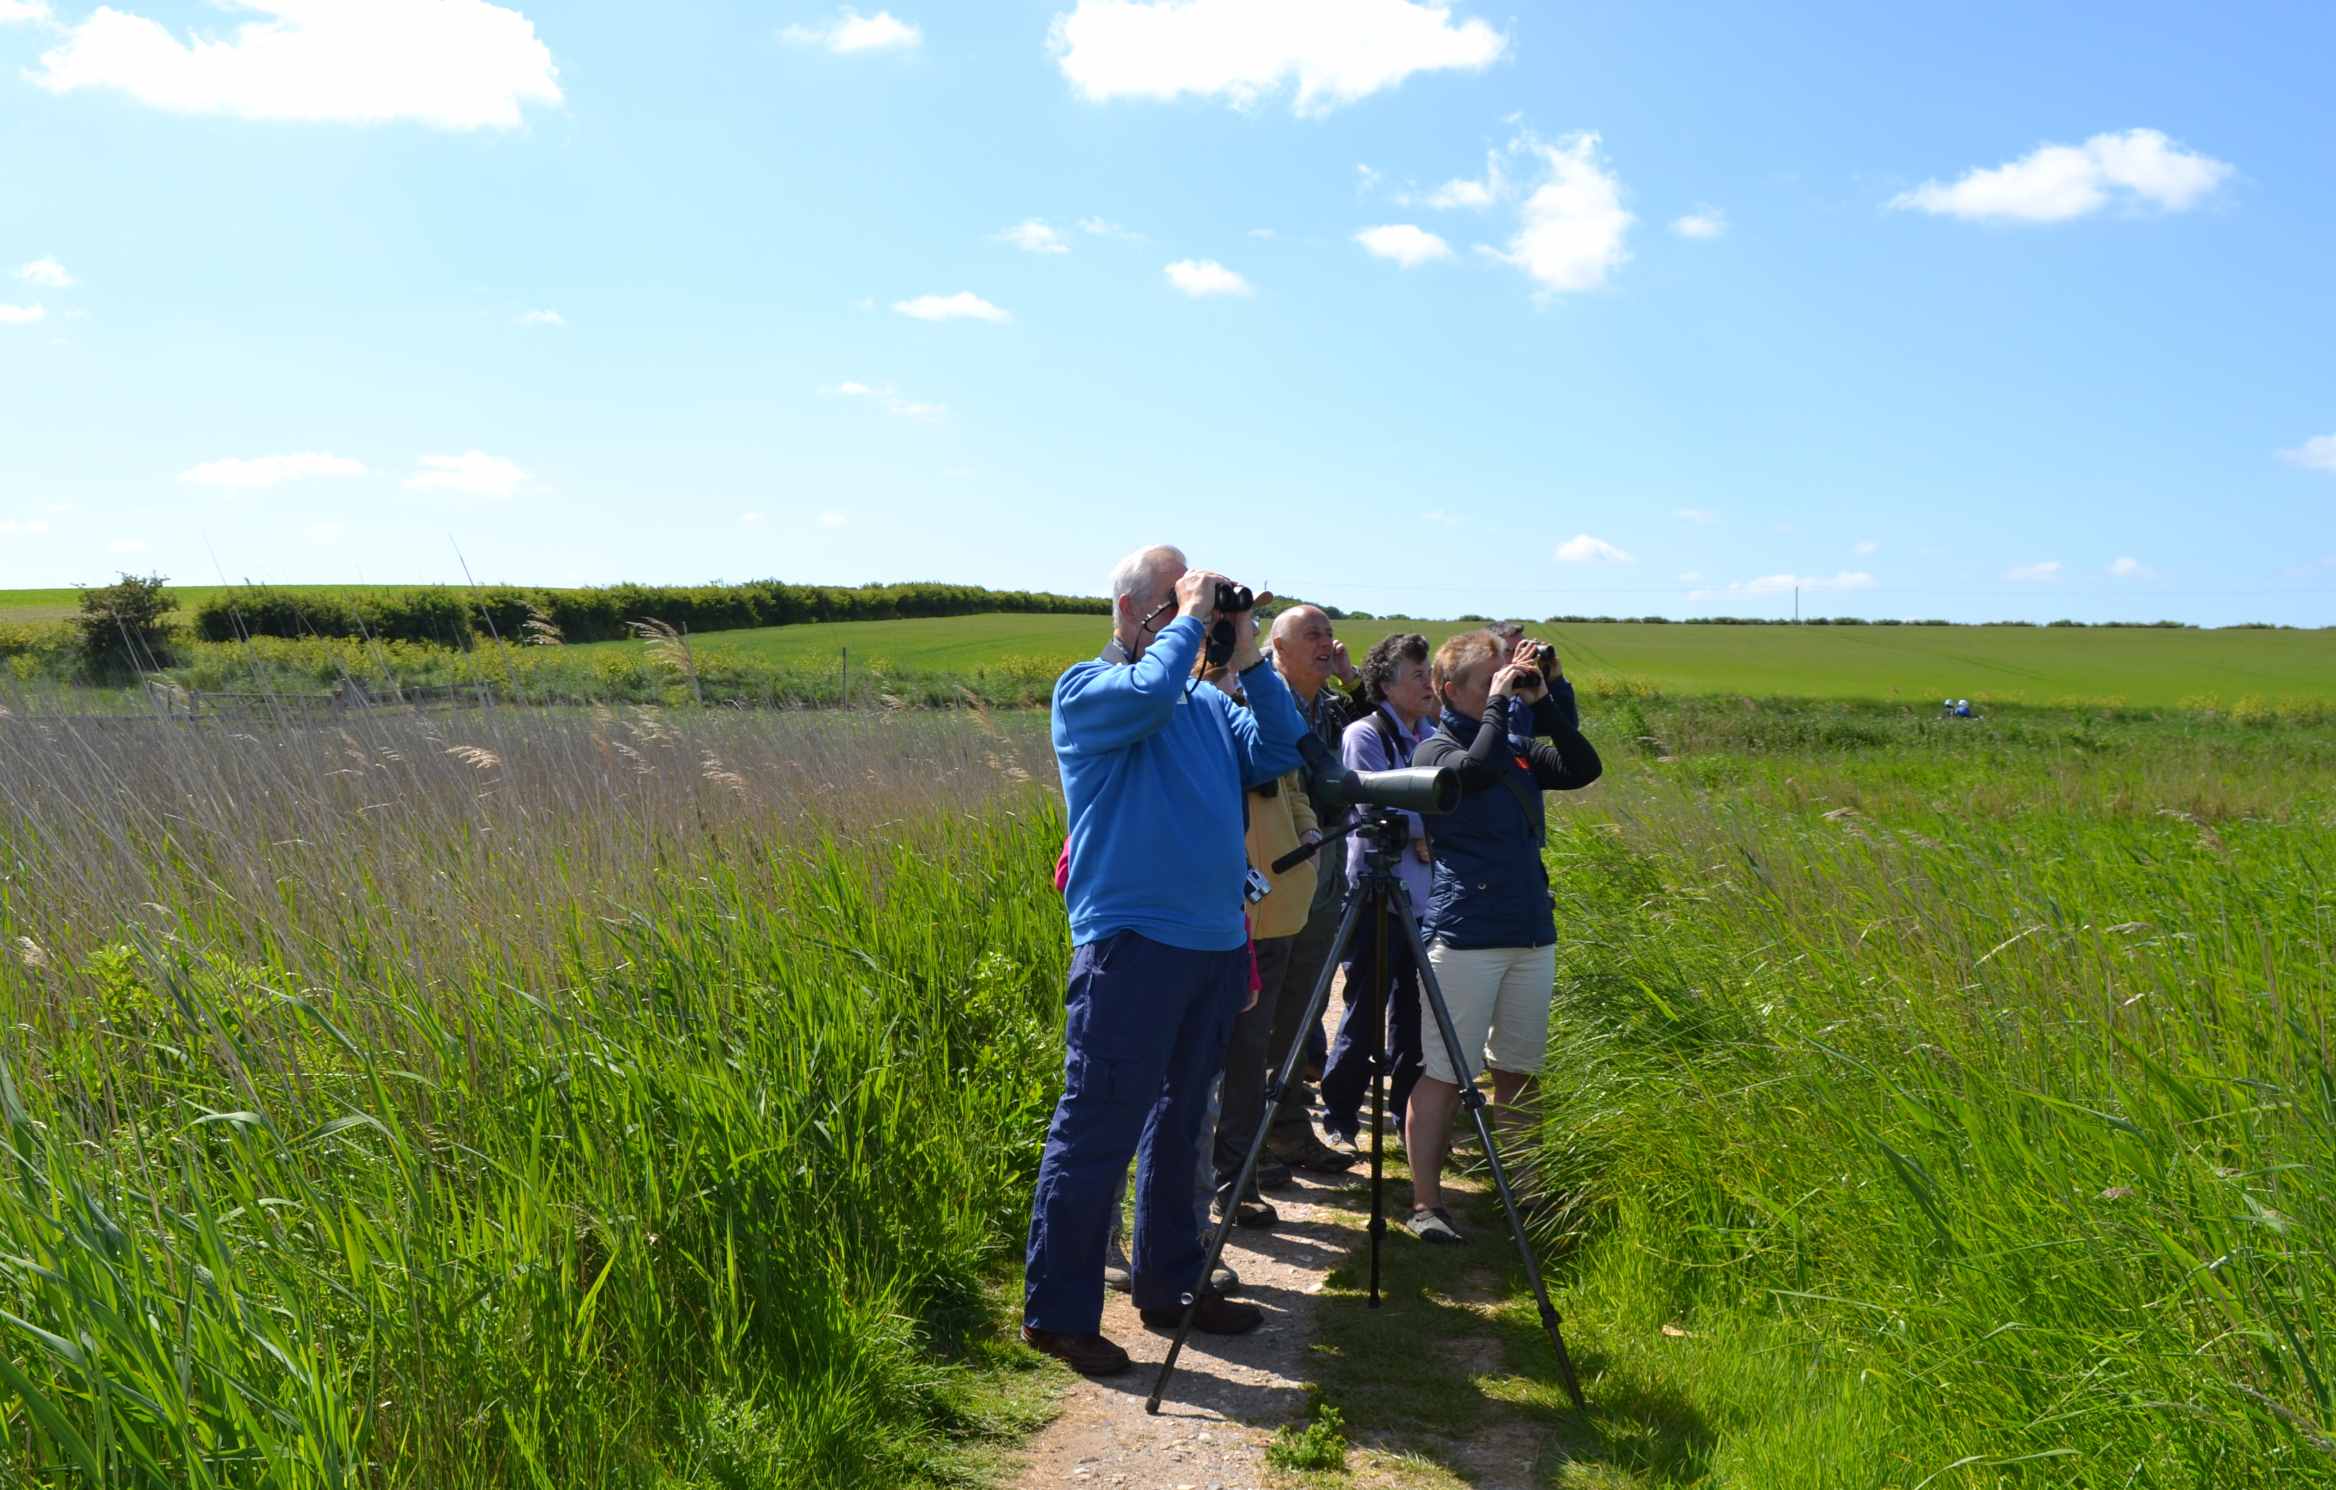 Circuit of Cley, NWT Cley Marshes NR25 7SA | A guided circuit walk around the reserve and along the shingle ridge | Walking, guided, wildlife